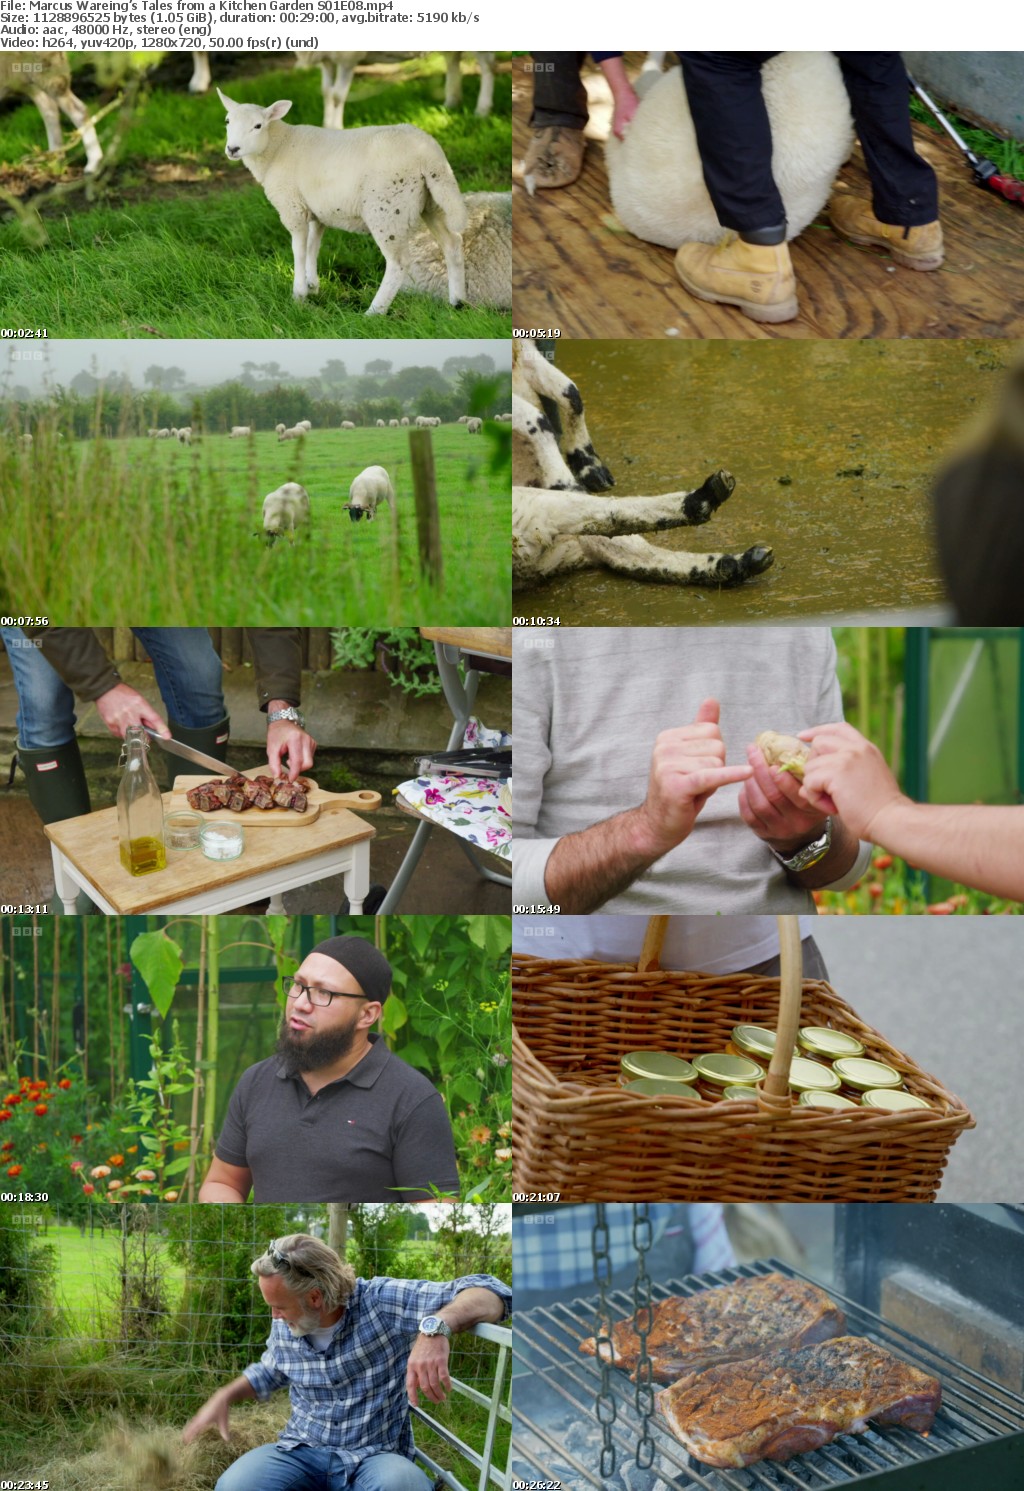 Marcus Wareings Tales from a Kitchen Garden S01E08 (1280x720p HD, 50fps, soft Eng subs)